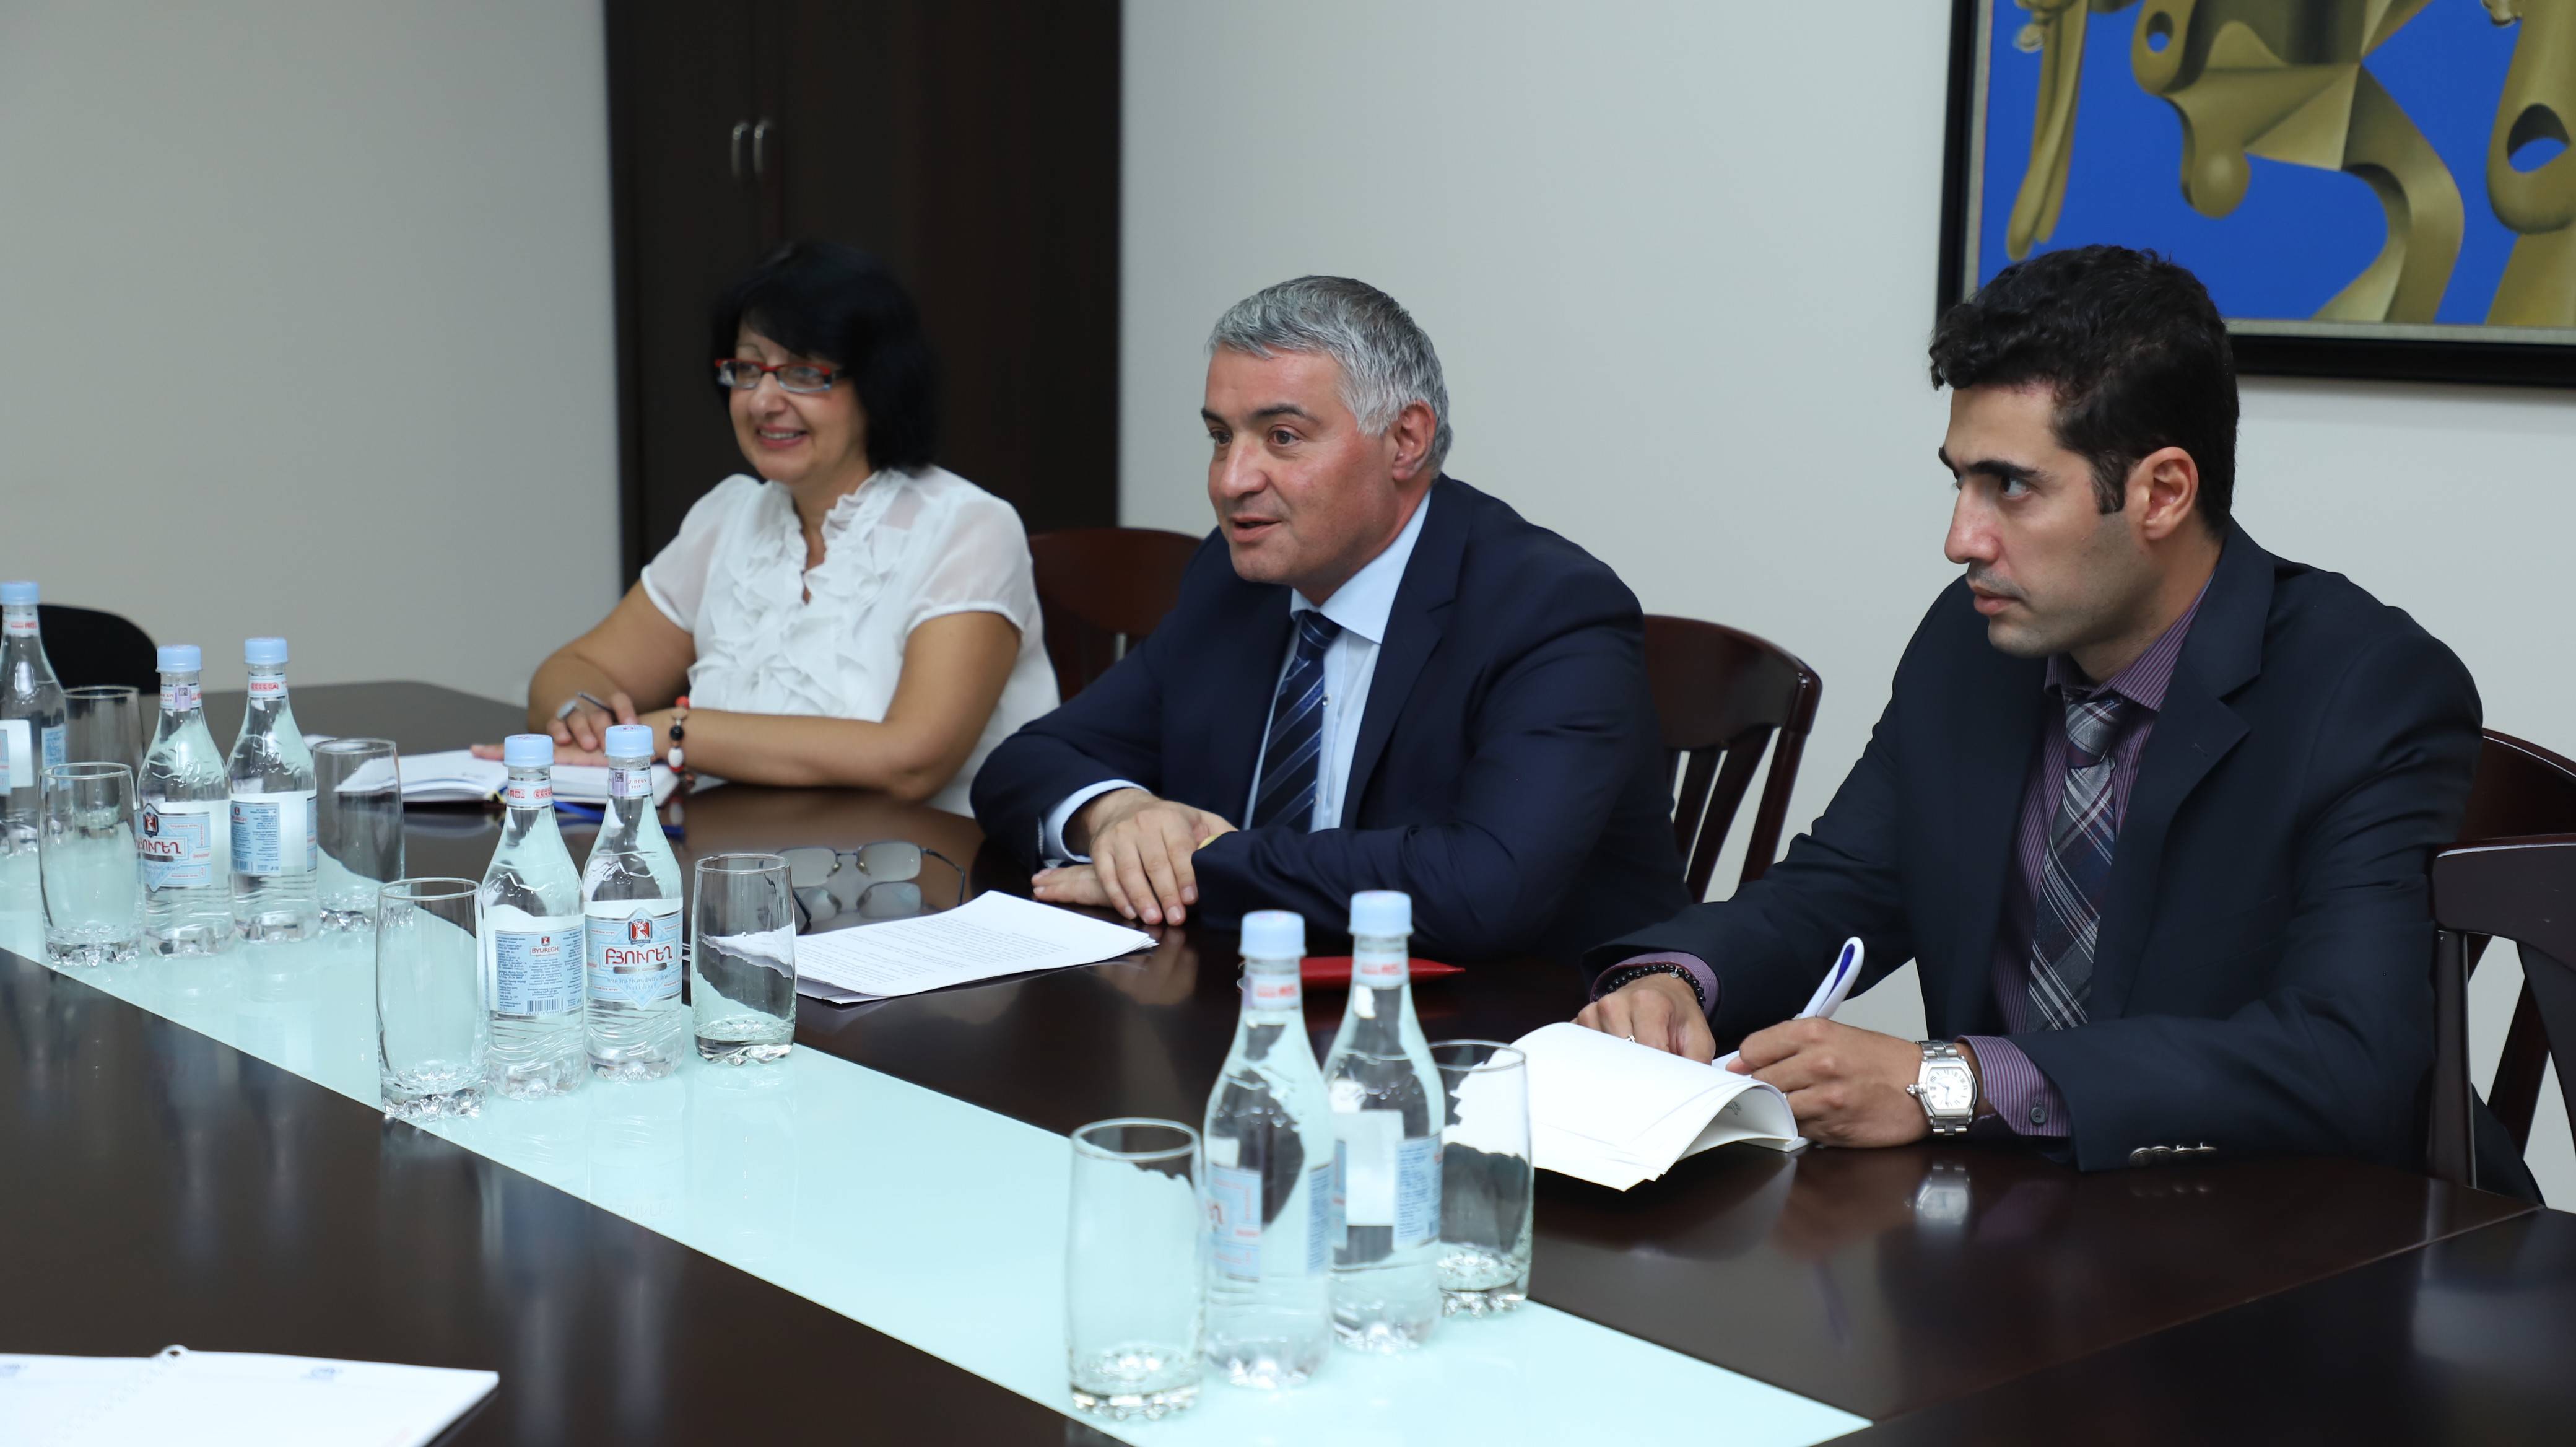 The meeting of Deputy Foreign Minister of Armenia Ashot Hovakimyan with newly appointed head of UNHCR Armenia office Anna-Carin Öst